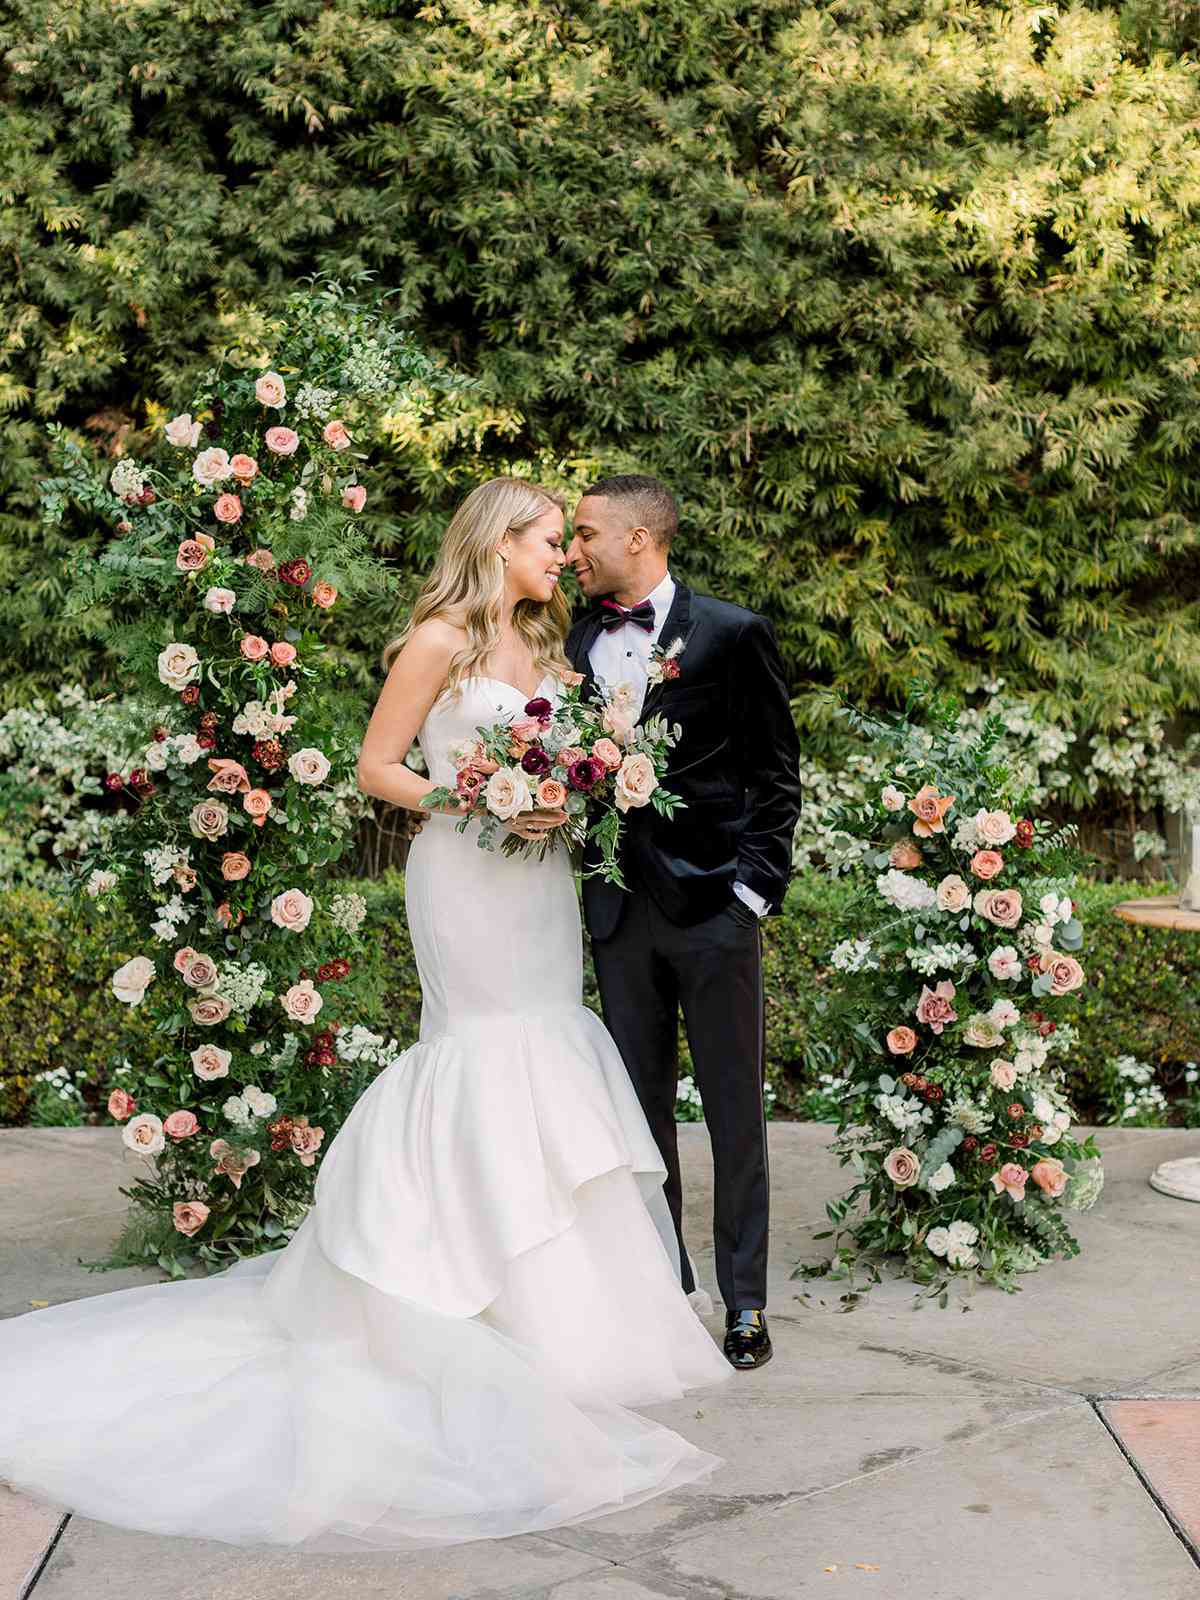 bride in white mermaid wedding dress and groom in black posing for portrait in front of floral arch